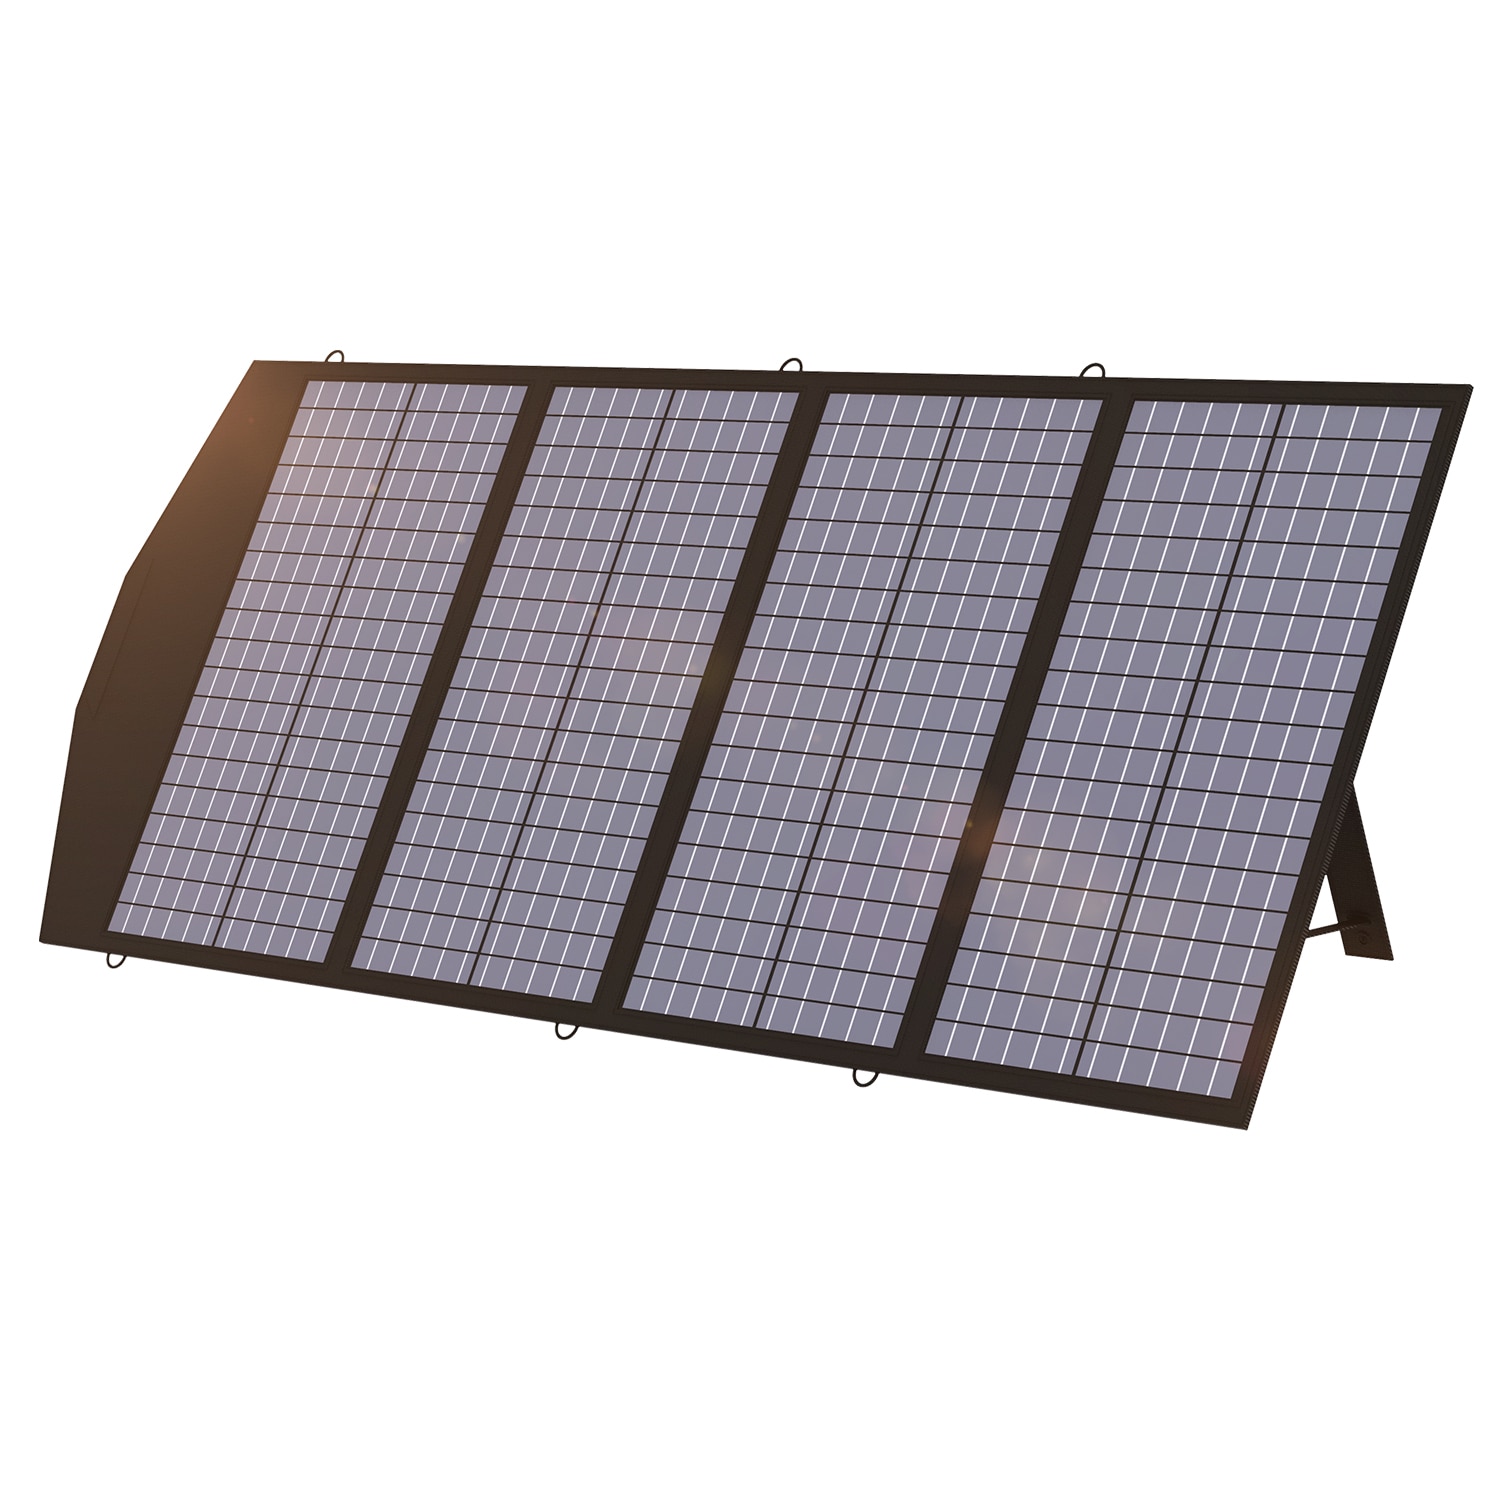 ALLPOWERS 18V 120W Solar Panel Charger Camping Outdoors Foldable Mobile Power Station Generator Solar Battery DC USB Output